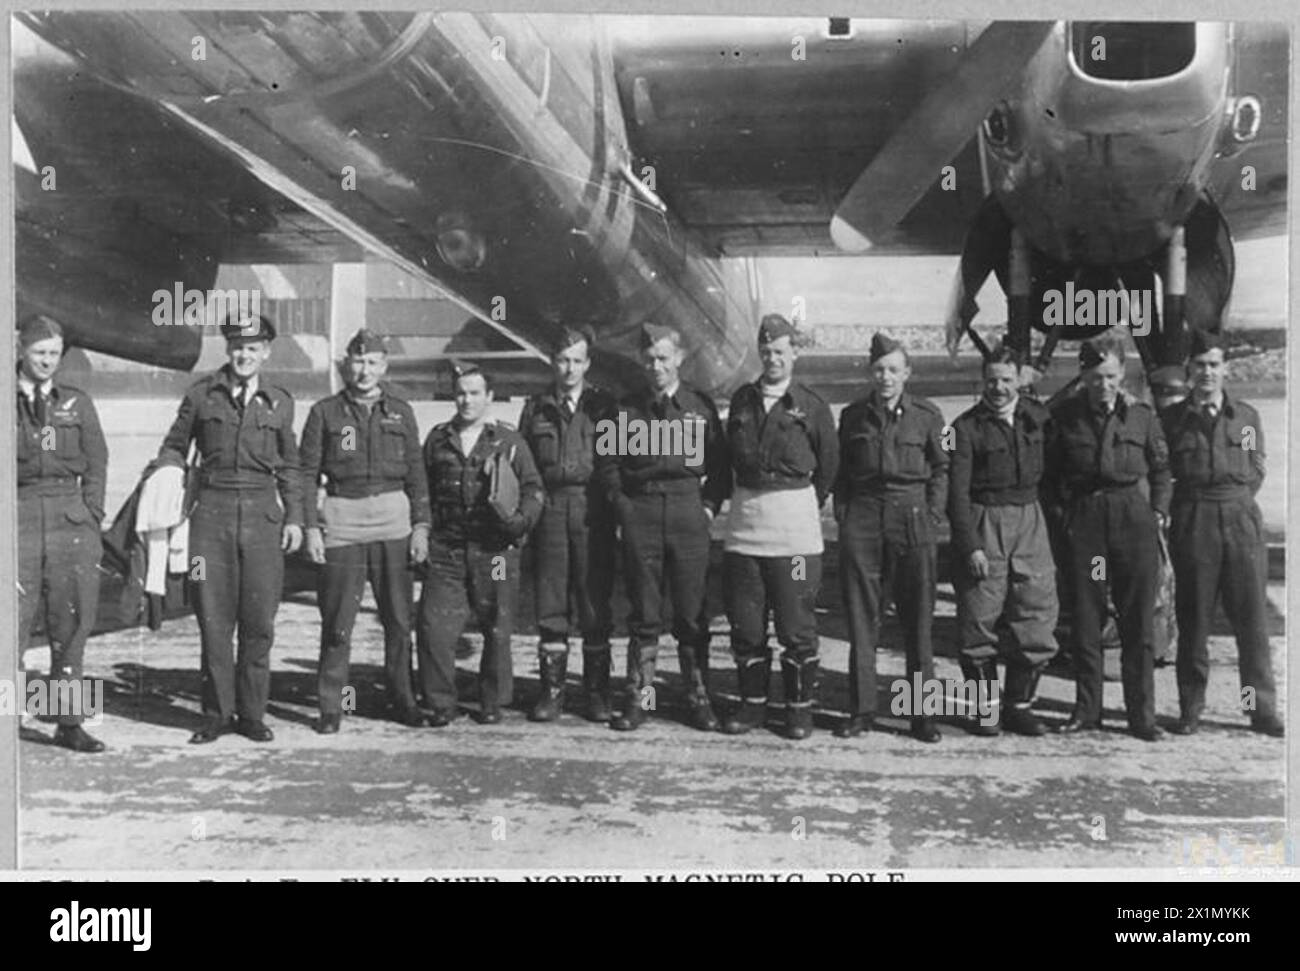 R.A.F. FLY OVER NORTH MAGNETIC POLE - 15493 Picture issued 1945 shows - Officers, NCOs and airmen responsible for the flight of the 'ARIES'. Left to right- wing Commander H.W. Anderson, OBE., DFC., Senior Navigator of Redworth Terrace, Totnes. Wing Commander K.C. Maclure; Senior Observer of Westmount, Province of Quebec. Warrant Officer A.S. Smith; Wireless Operator, of 18 Crofton Righ, Kinghorn, Fife; Flight Lieutenant S.T. Underwood; Navigator/Plotter of 18 Ashby Road, Coalville; Wing Commander D.C. McKinley, DFC., AFC., Captain, of High Hatton Hall, Hodnet, Shropshire. Squadron Leader A.J. Stock Photo